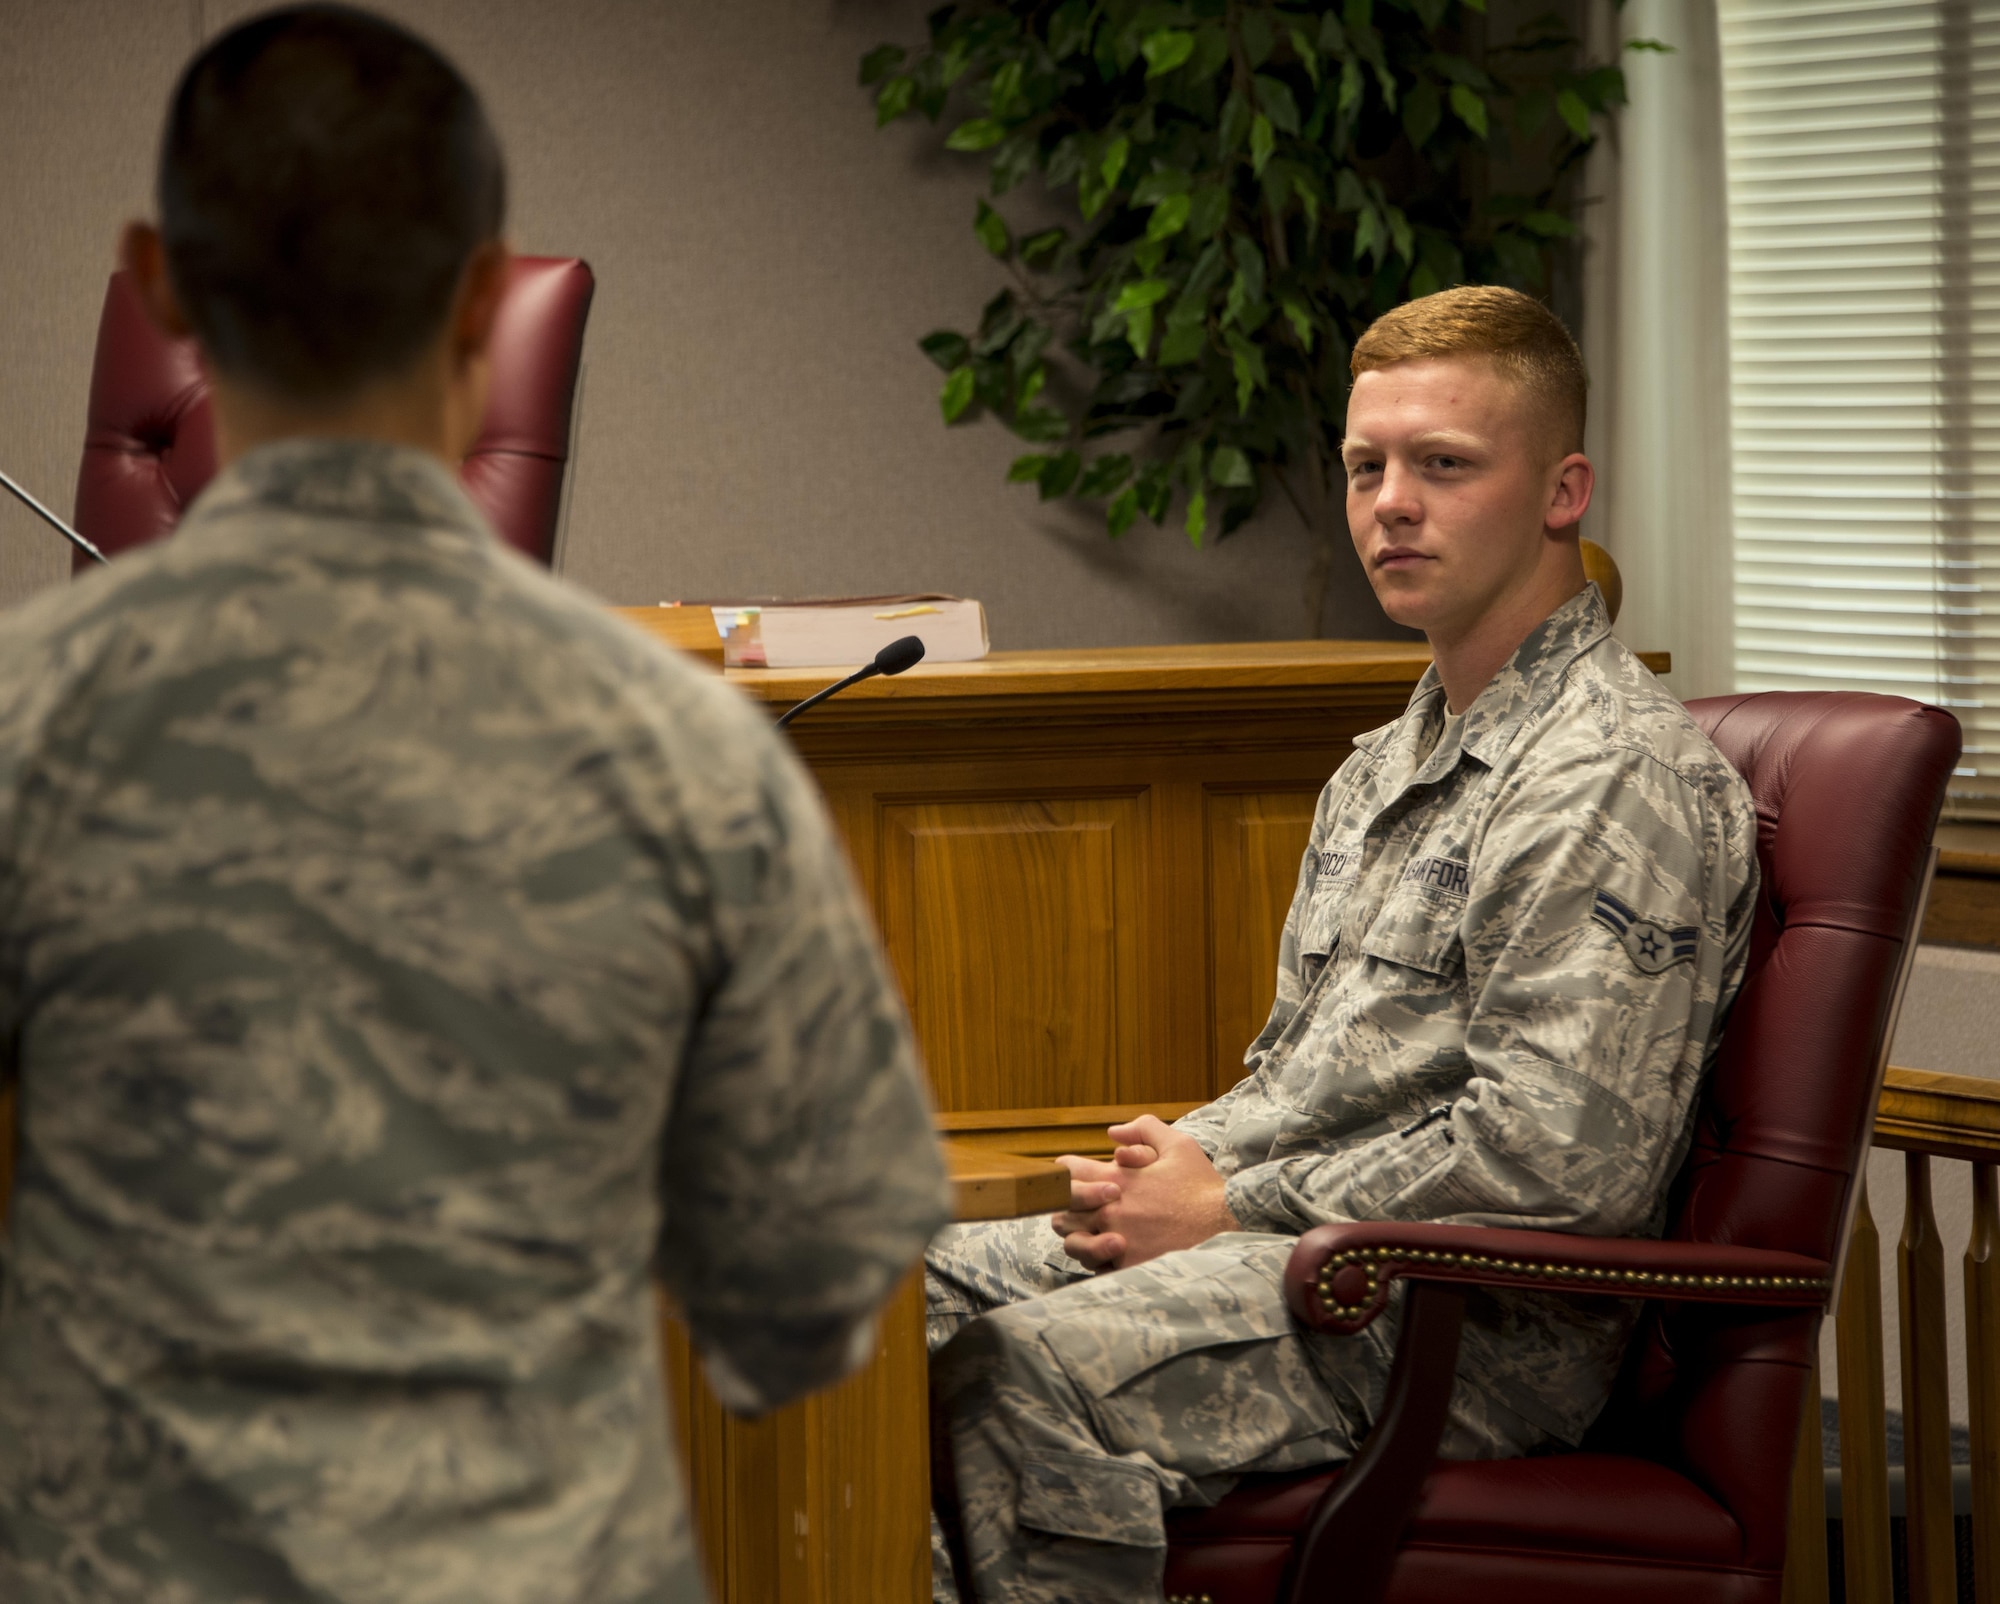 Capt. Joseph Cachuela, 60th Air Mobility Wing Legal Office attorney, left, shows Airman 1st Class Jonathan Rocca, 60th Civil Engineer Squadron electrician, right, what it's like to be on the stand during a court-marital proceeding at Travis Air Force Base, Calif., Sept. 15, 2016. (U.S. Air Force photo by Staff Sgt. Charles Rivezzo)